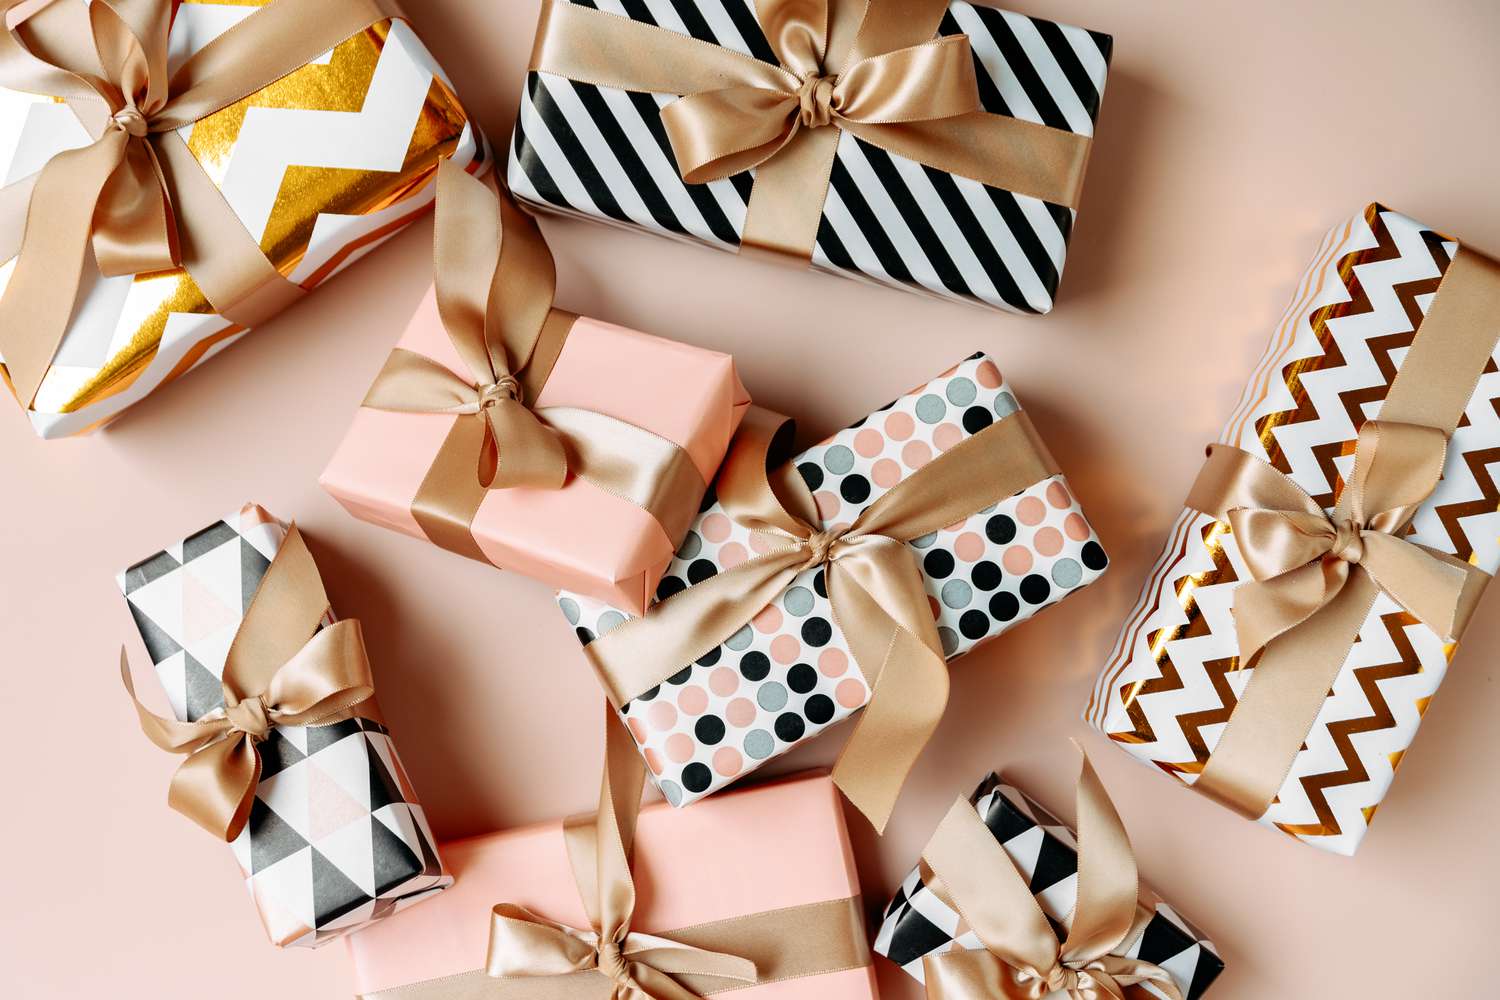 How to Wrap Gifts the Right Way, According to a Pro